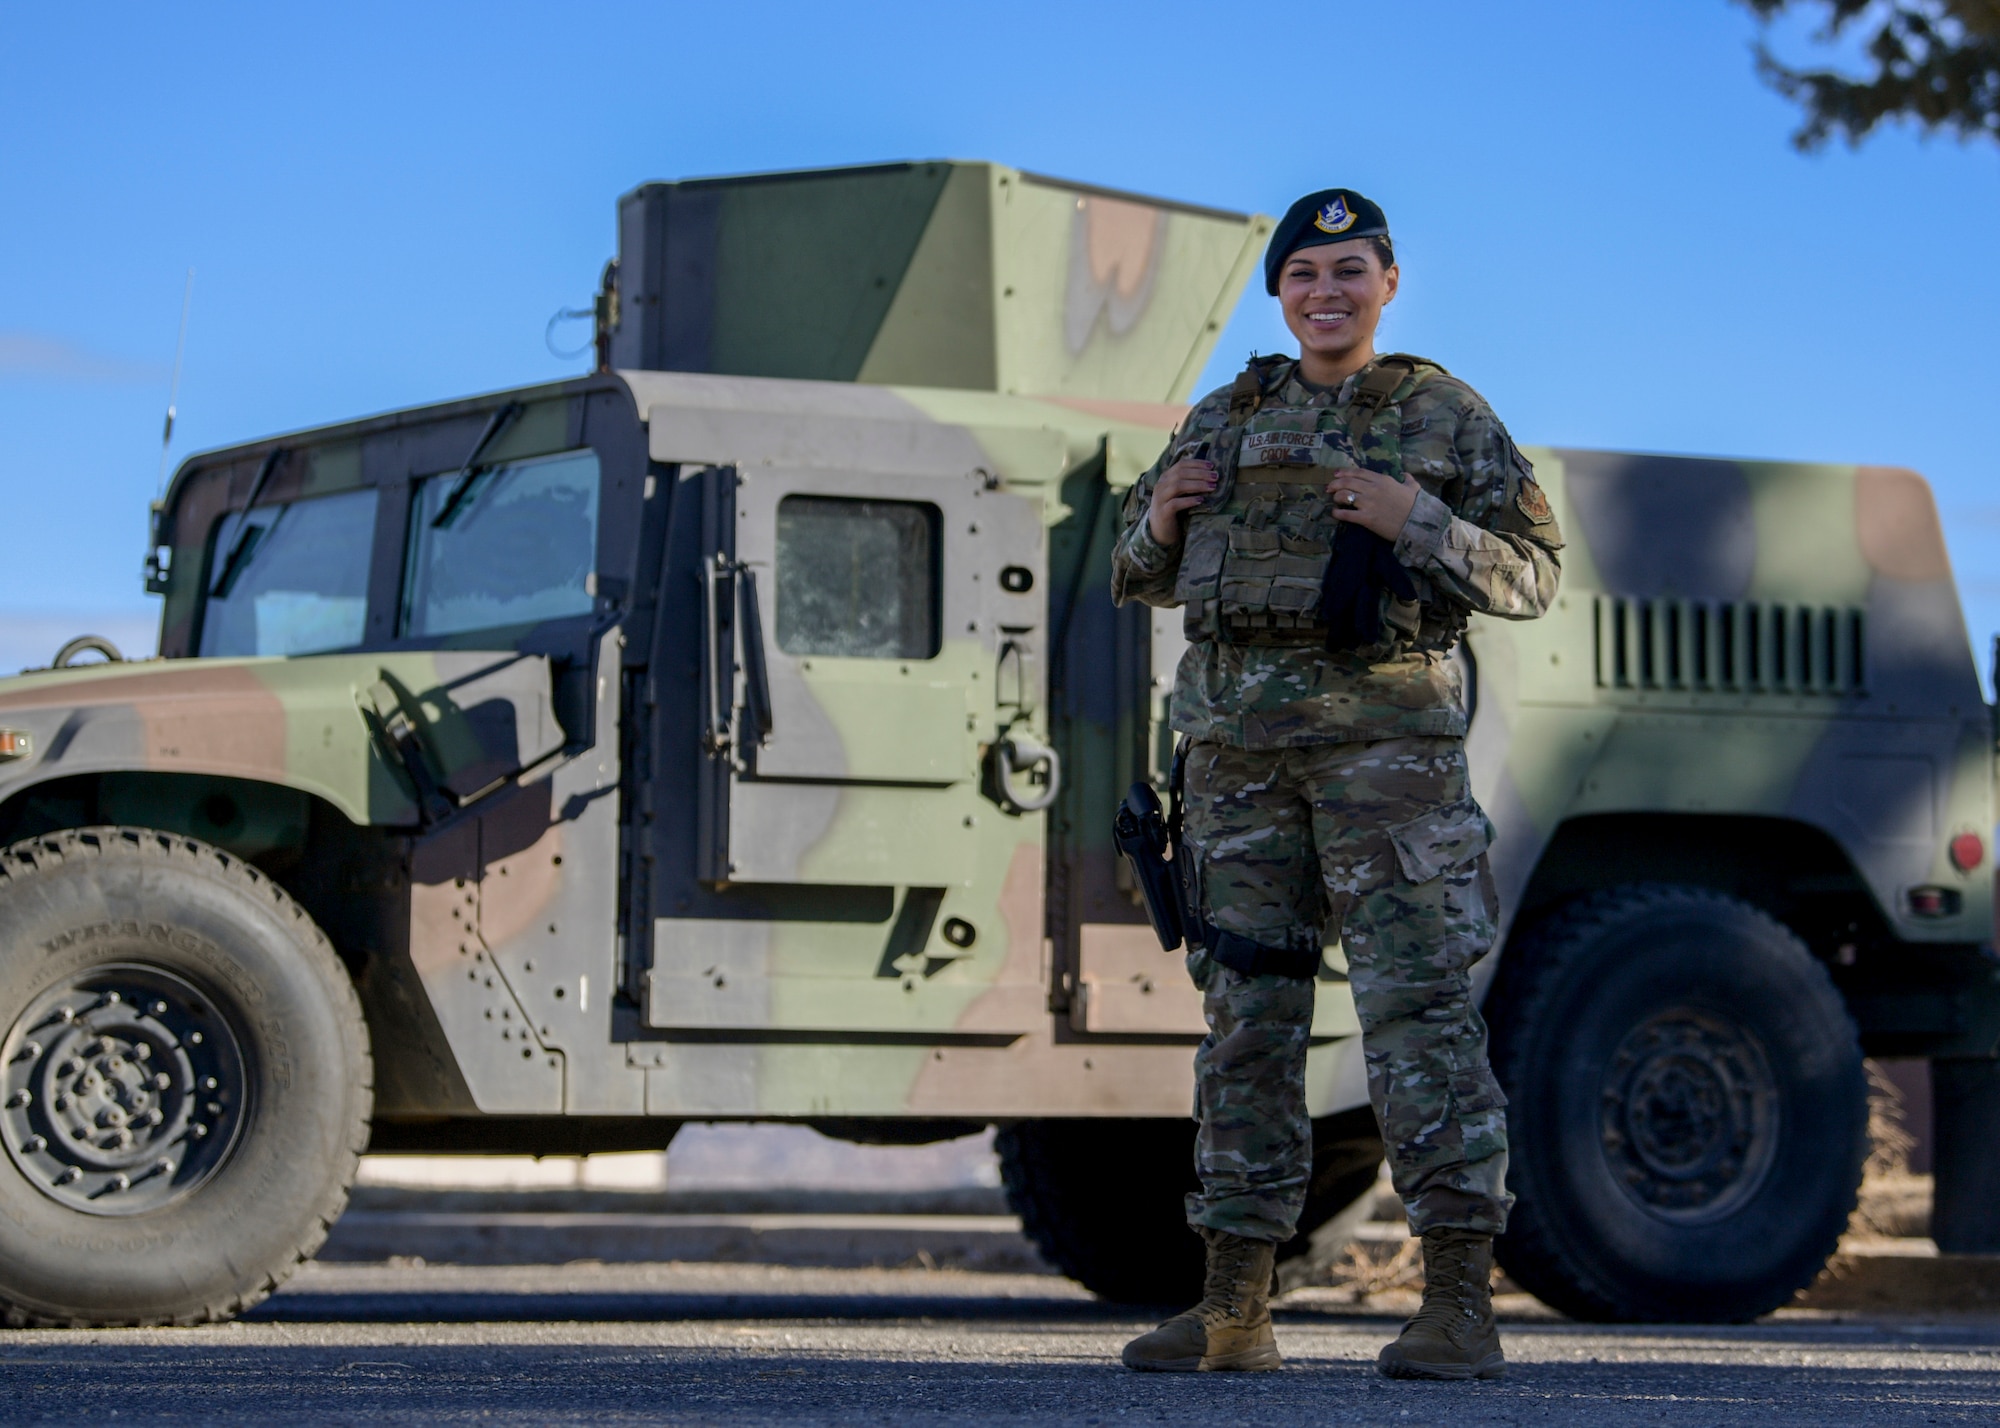 Senior Airman Kiah C. Cook, 377th Security Forces Group defender, poses in the new female body armor at Kirtland Air Force Base, N.M., Feb. 4, 2021. Airmen from the 377th SFG were among the first Air Force defenders to receive the new issue of female body armor starting January 2021.